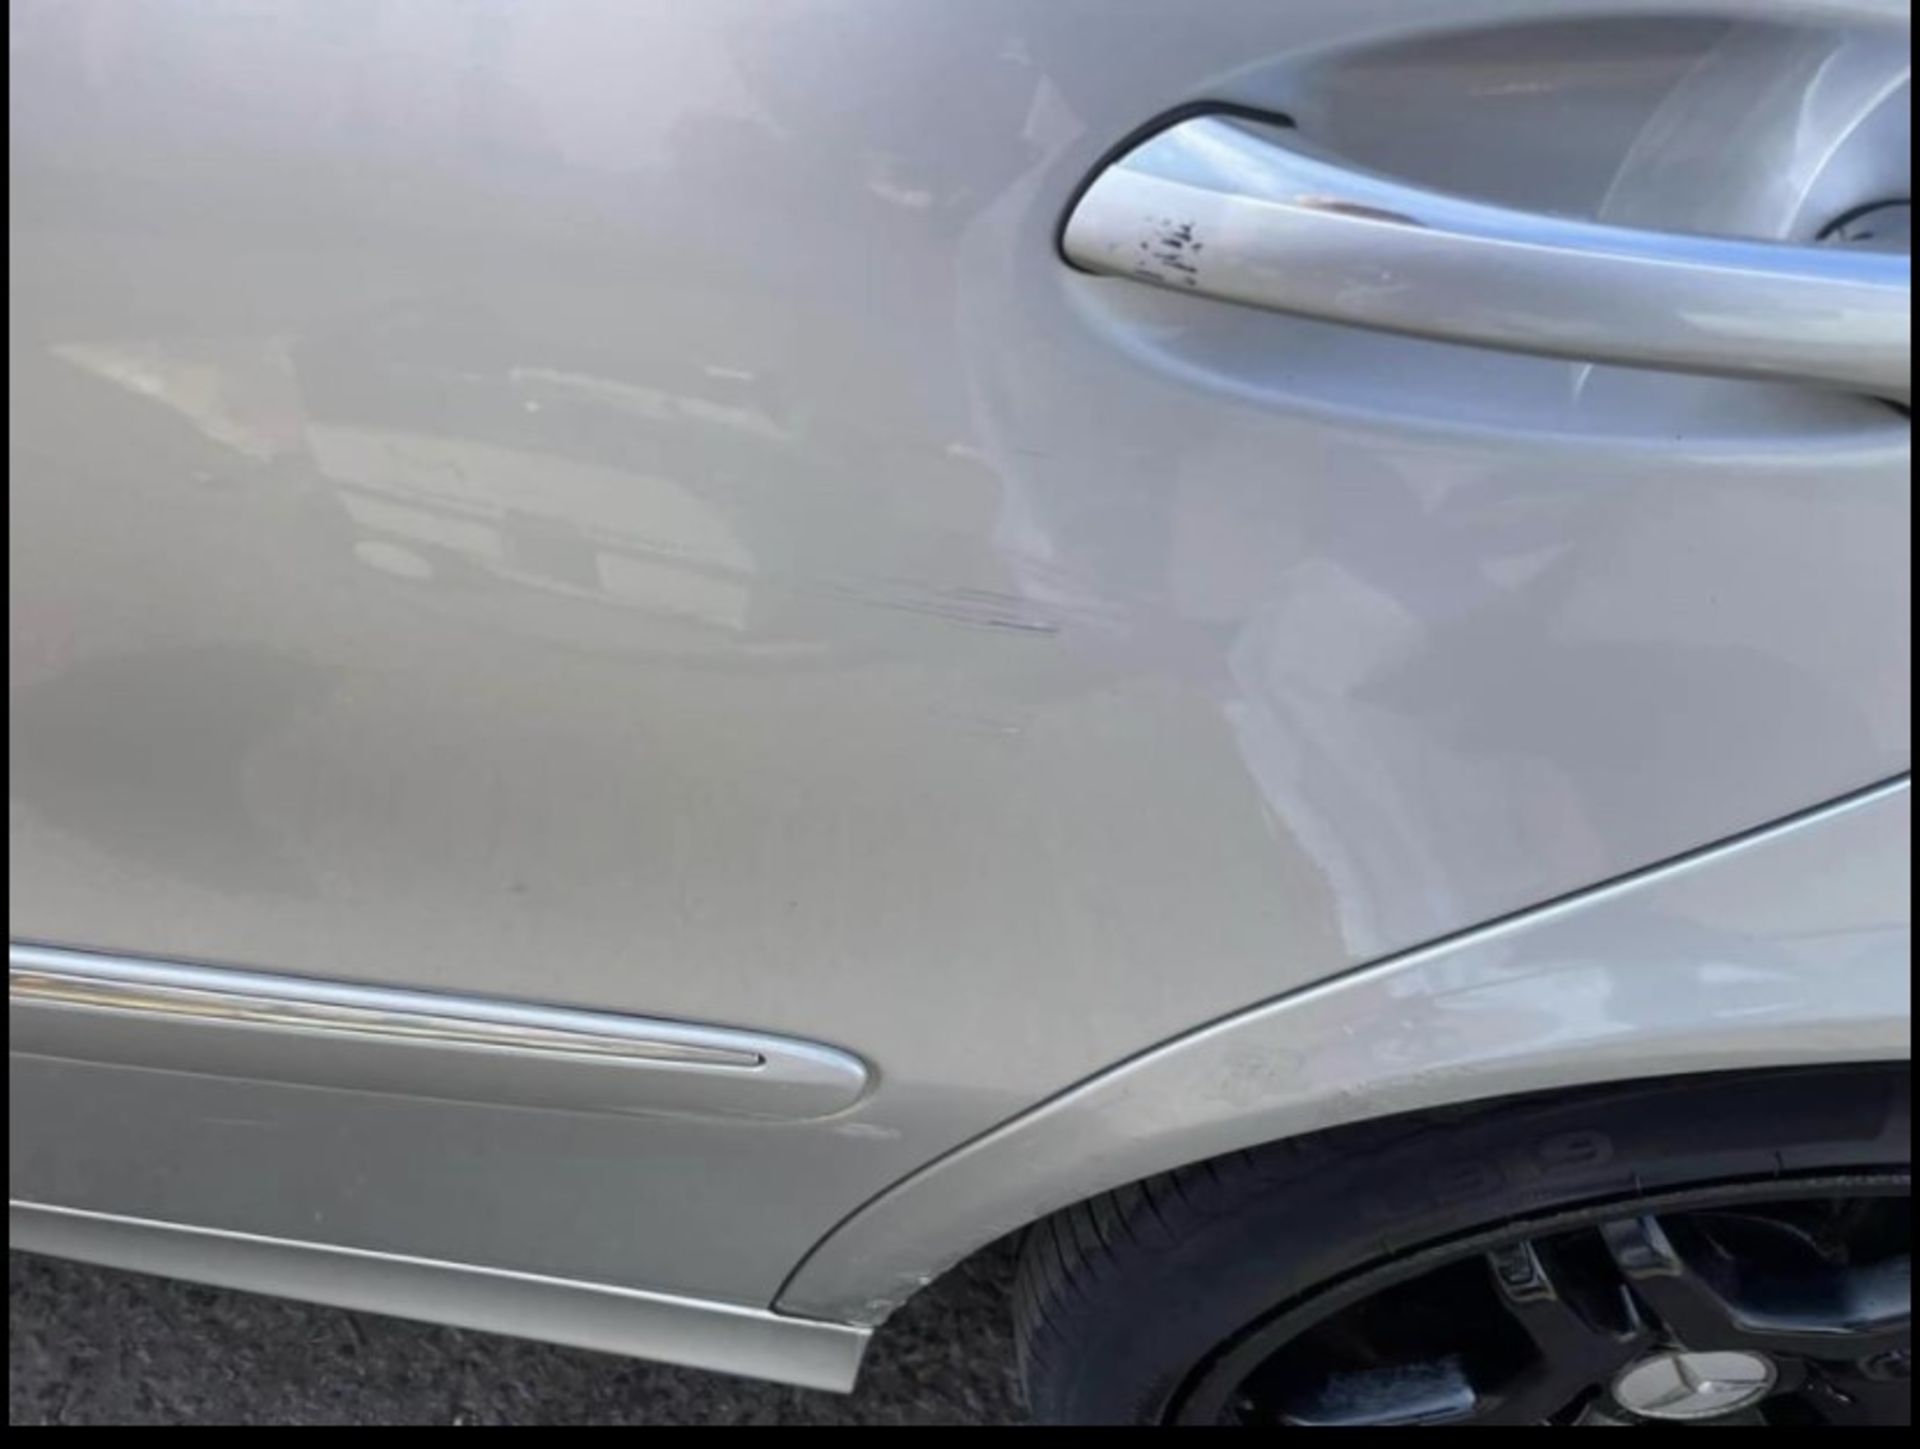 Mercedes E320 CDI 103k genuine miles ,as per pictures has scratches as shown in photos but is all in - Bild 7 aus 14